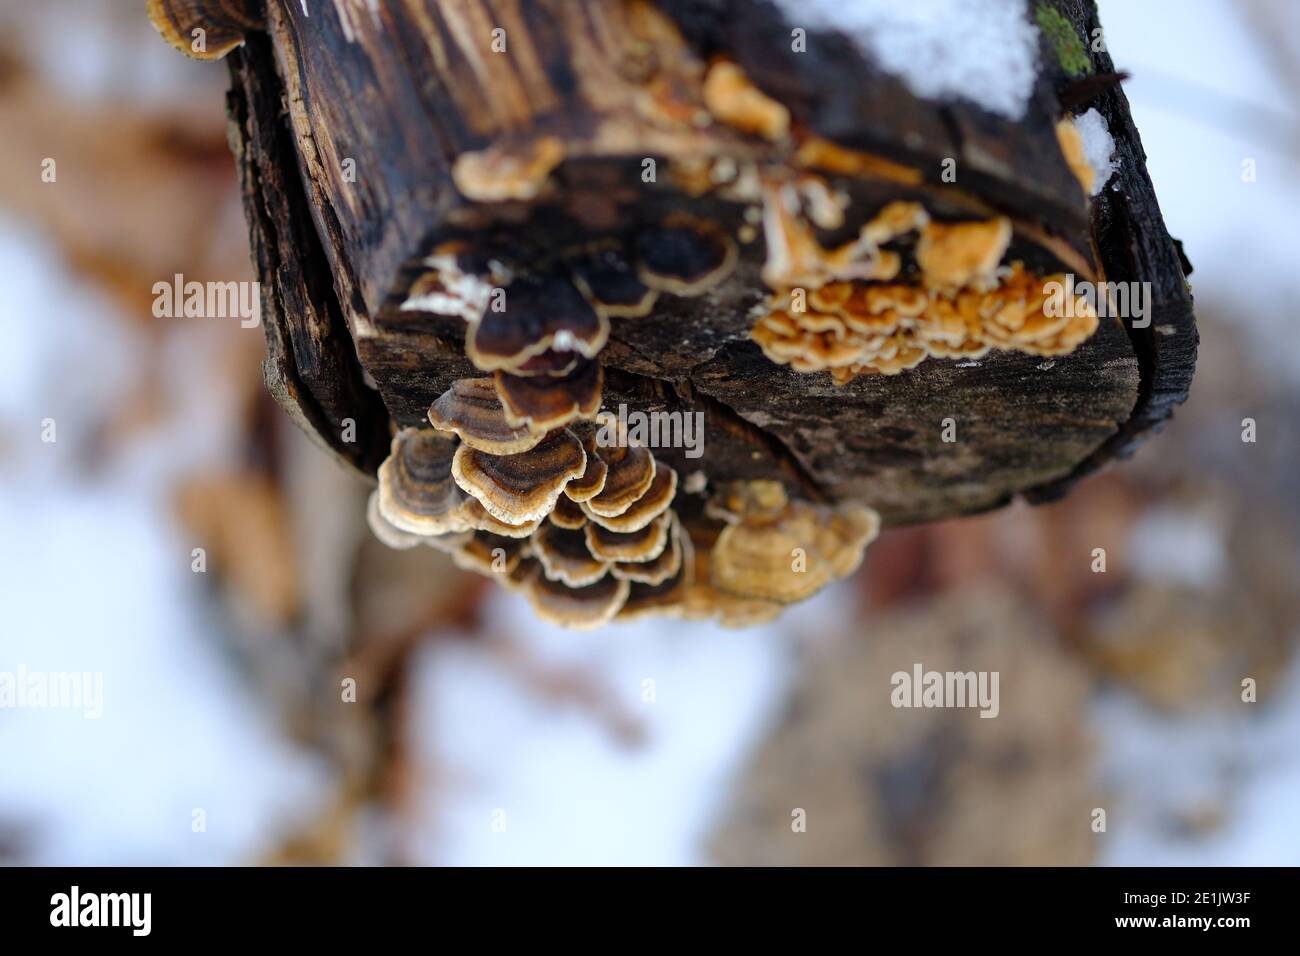 Turkey tail bracket fungus (Trametes versicolor) on the top of a fallen log in winter in a forest outside Ottawa, Ontario, Canada. Stock Photo